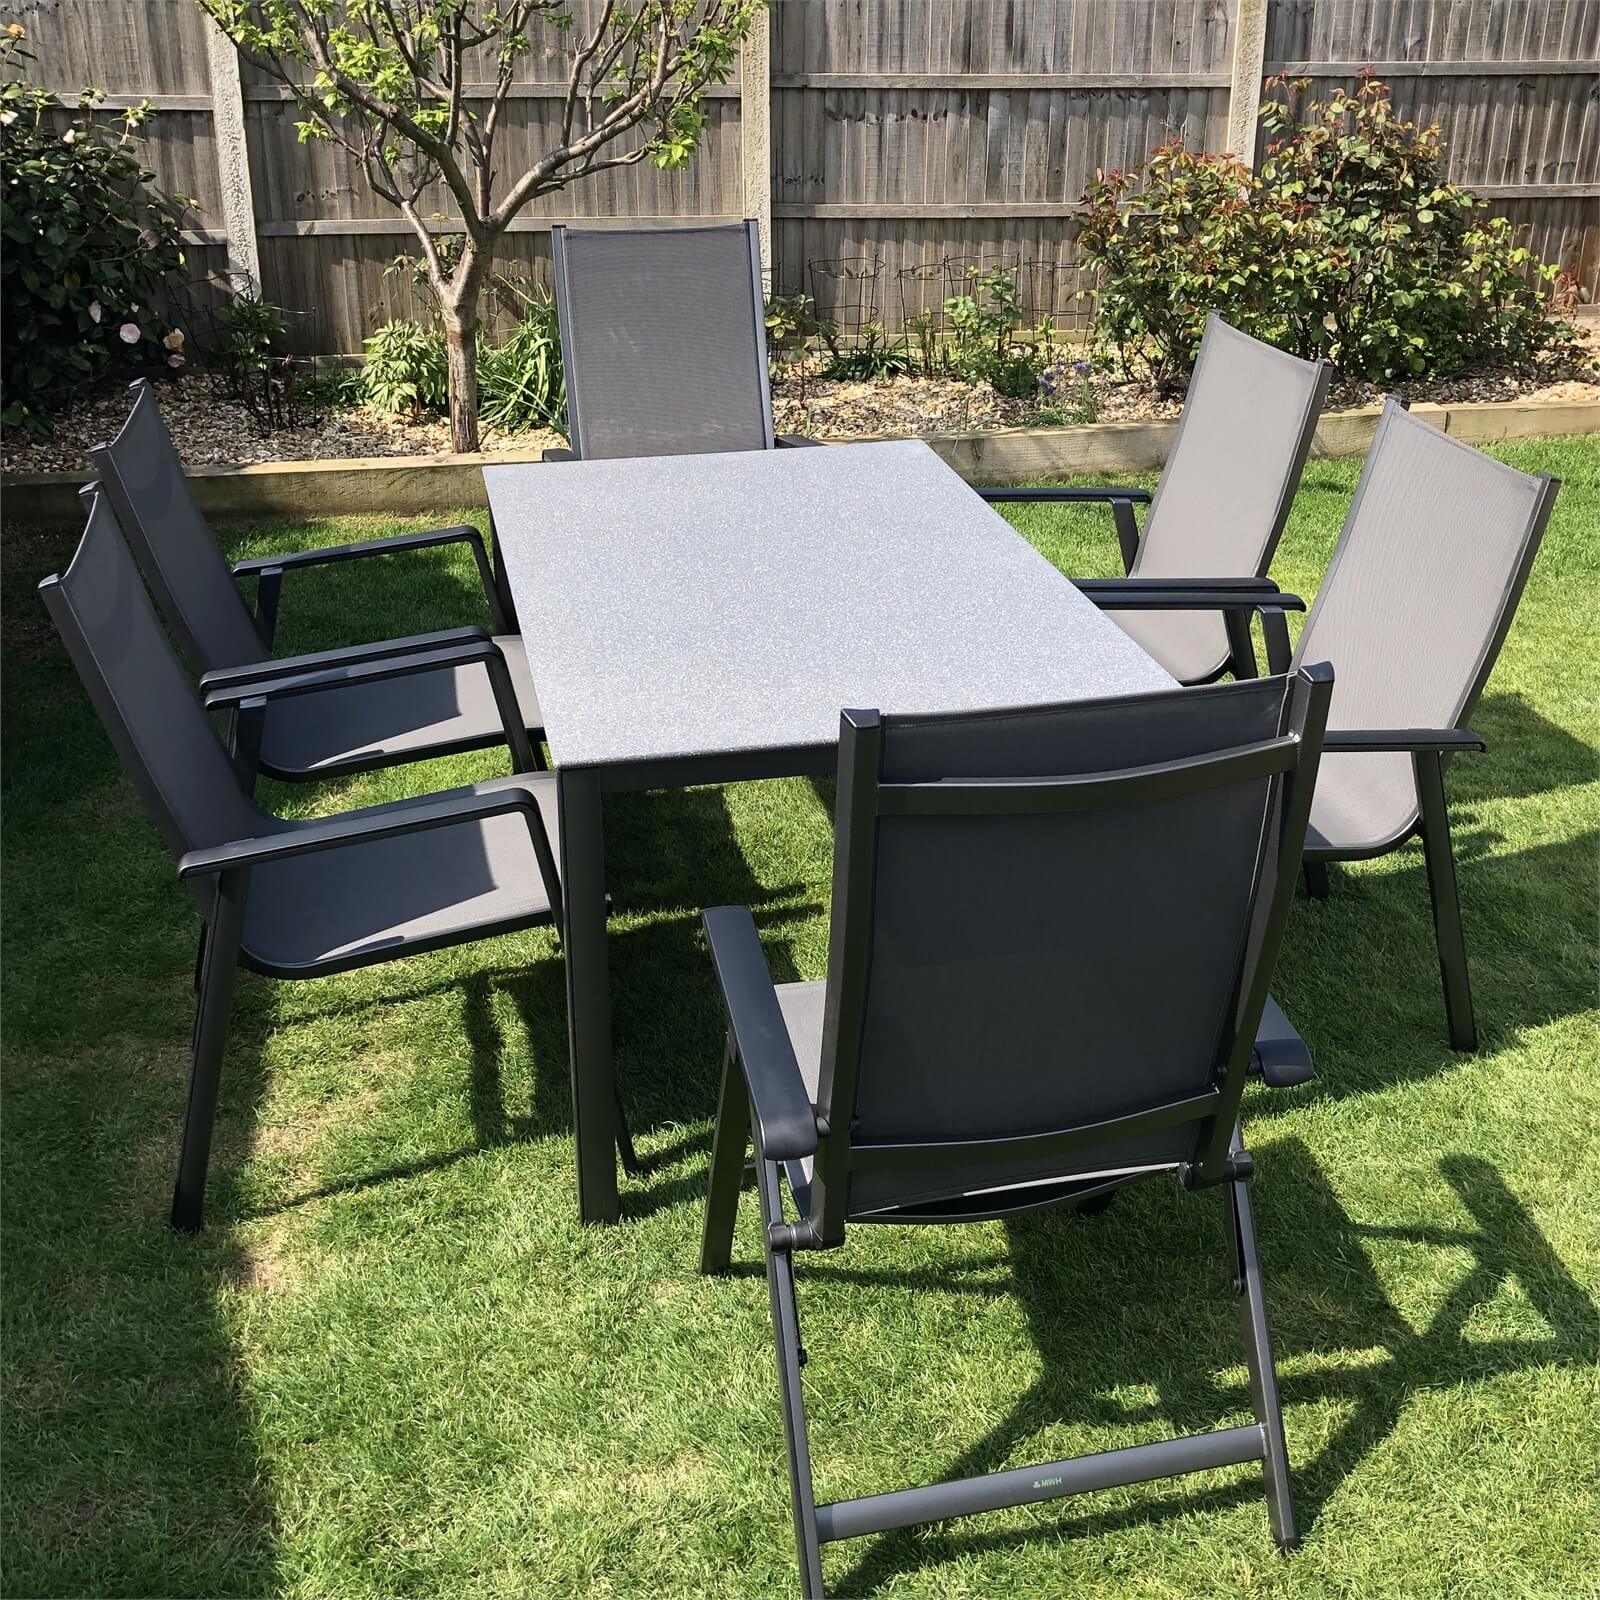 Mwh Elements 6 Seater Metal Garden Furniture in Anthracite